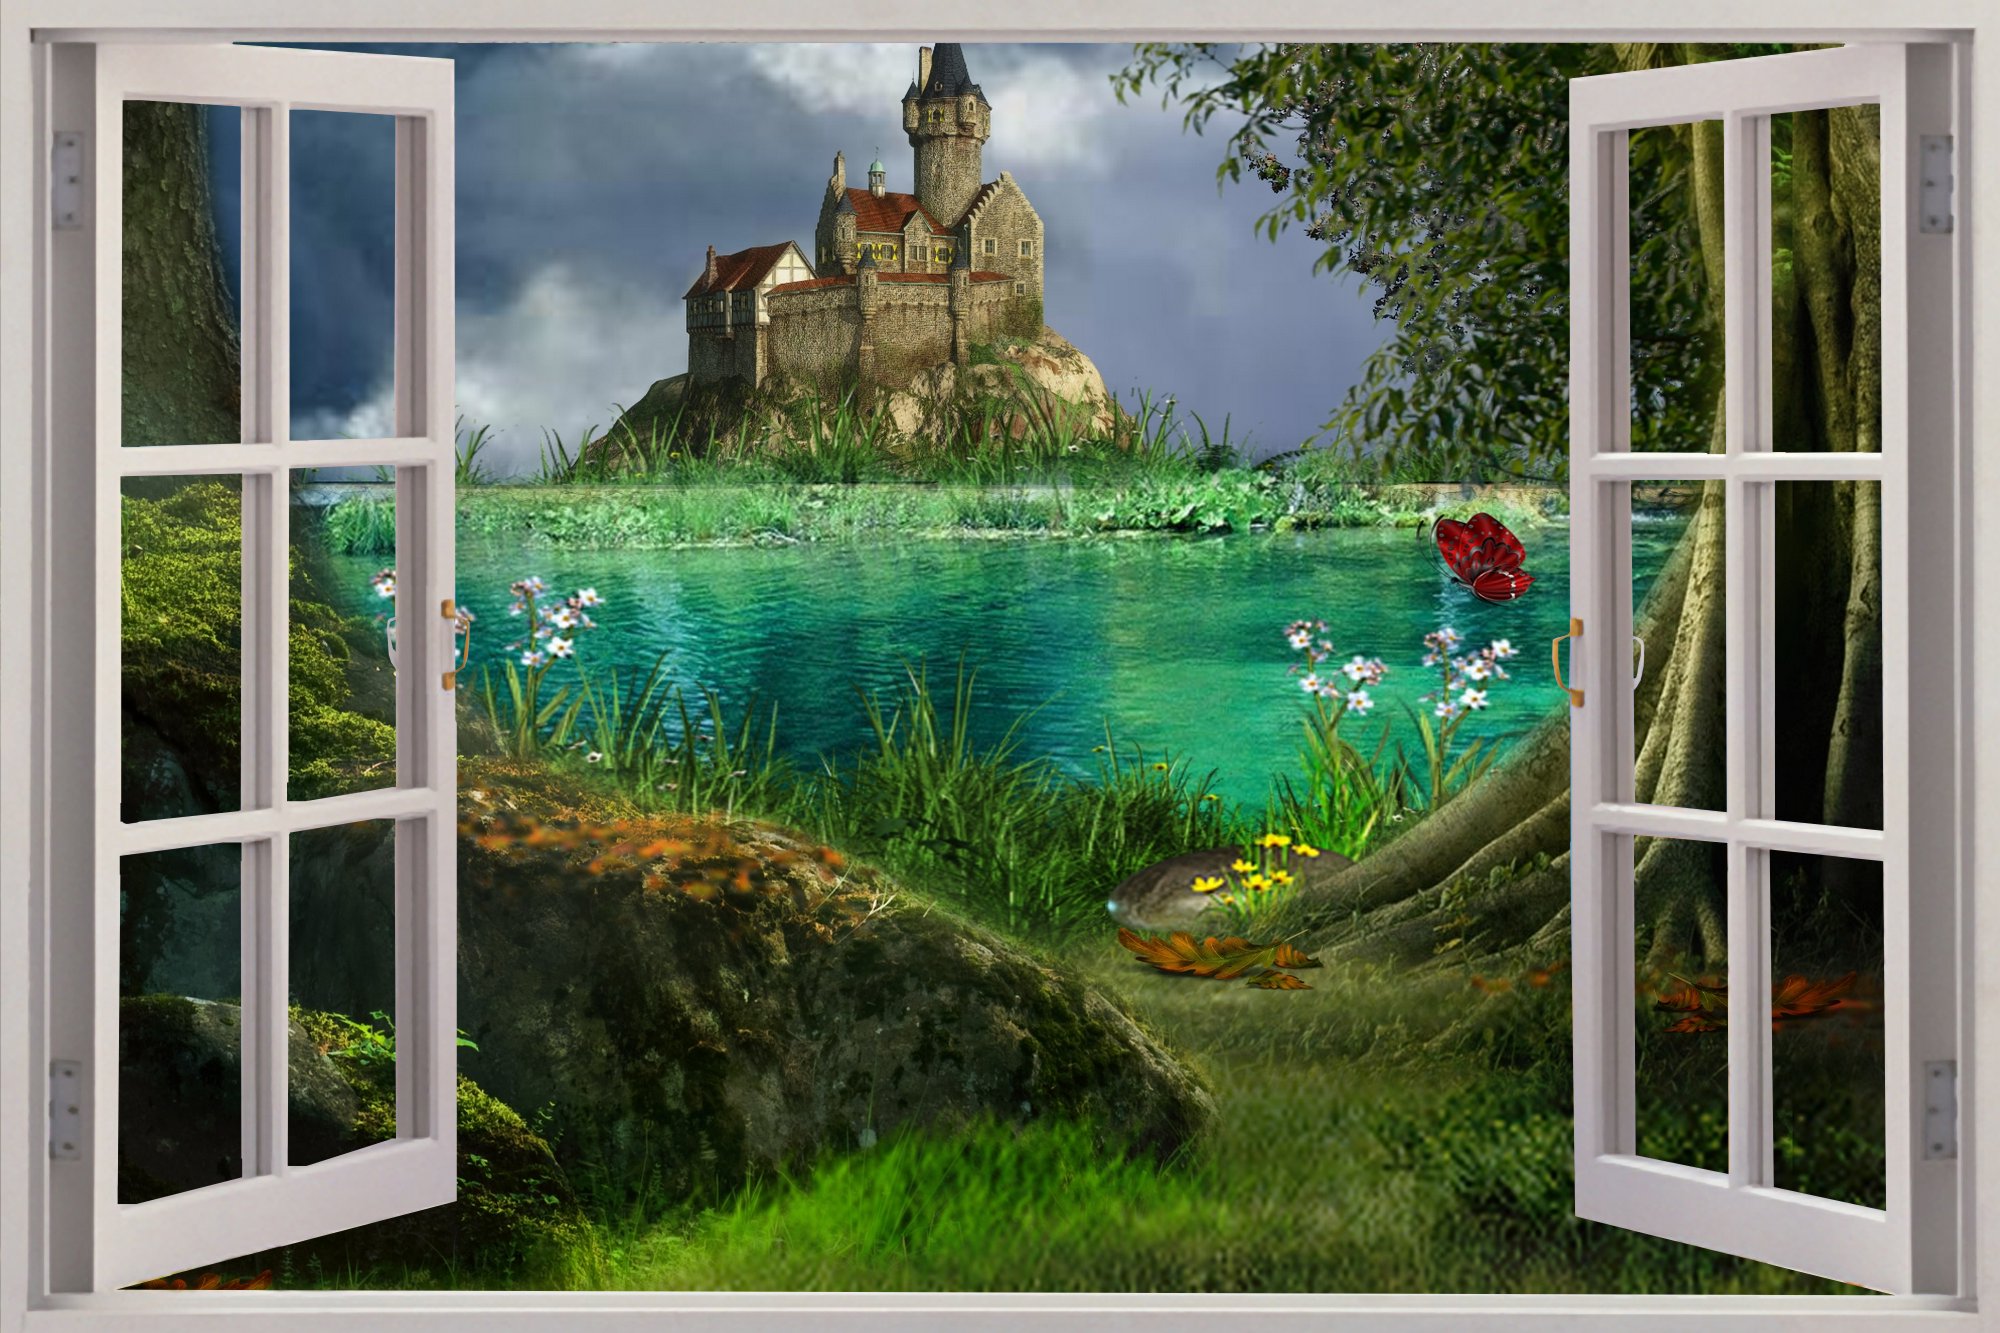 Enchanted Castle Wall Stickers Mural Art Decal Wallpaper